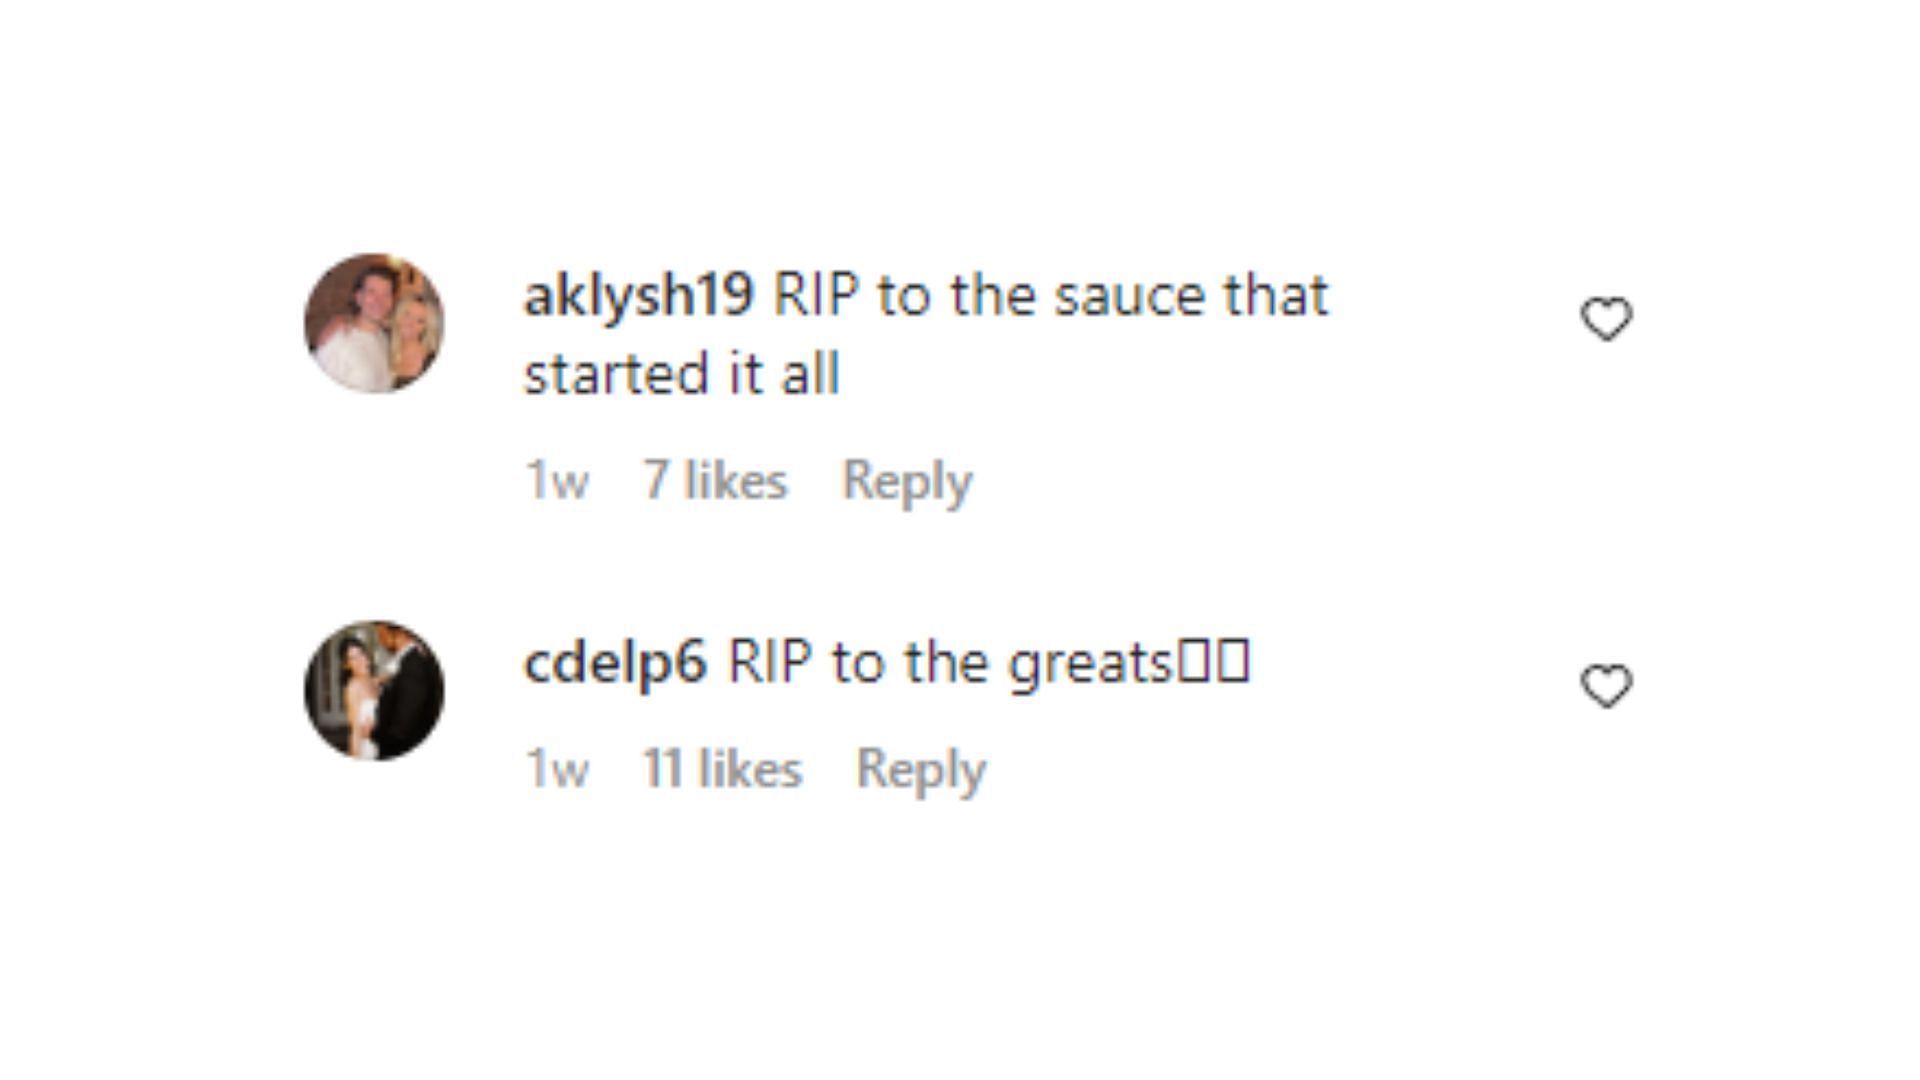 comments by the users @aklysh19 and @cdelp6